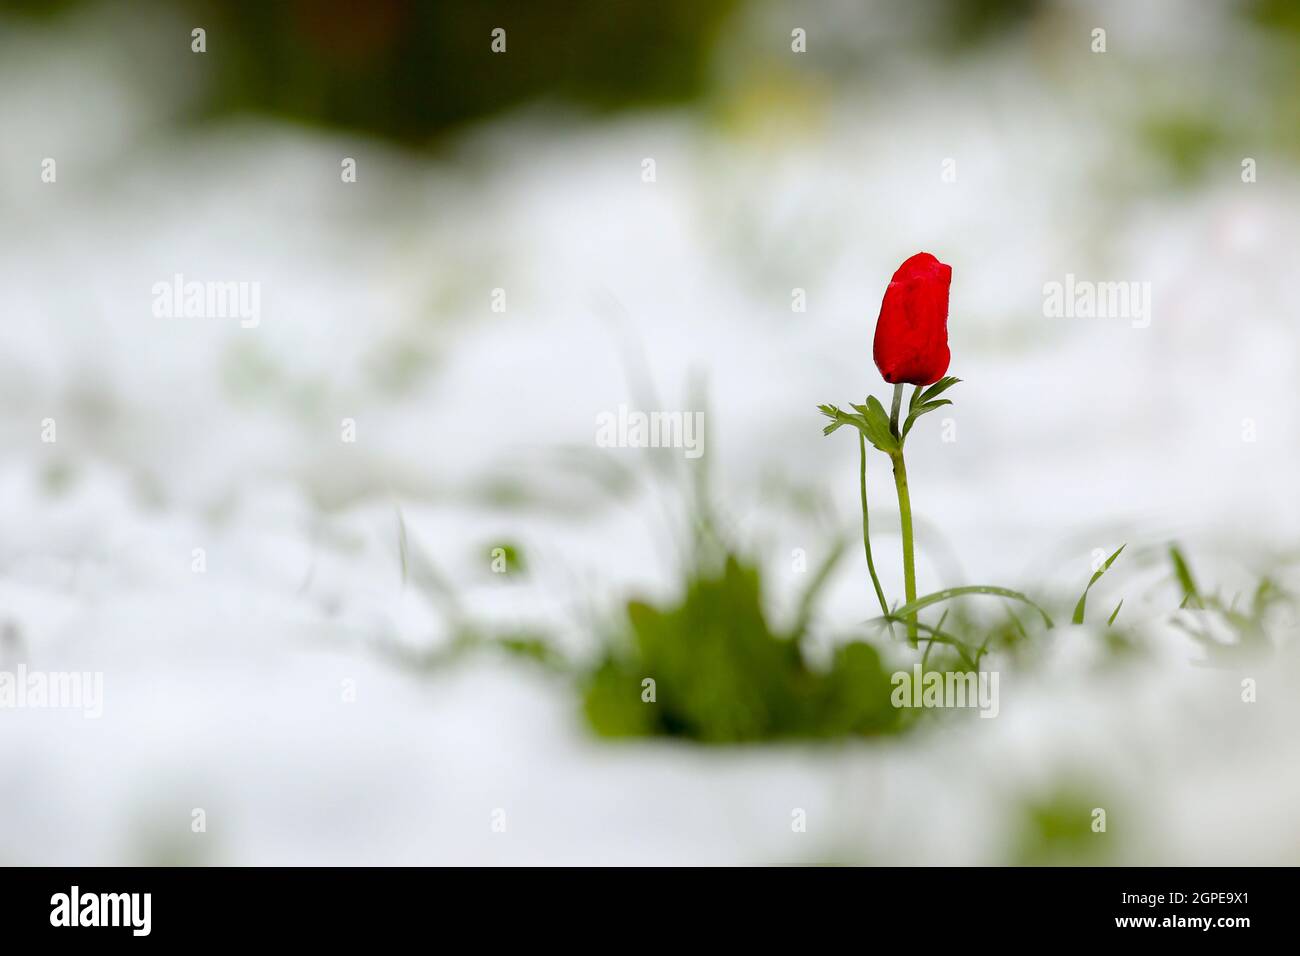 Anemone coronaria AKA Spanish marigold or Kalanit (in Hebrew) in the snow. Photographed in Israel in the winter Stock Photo